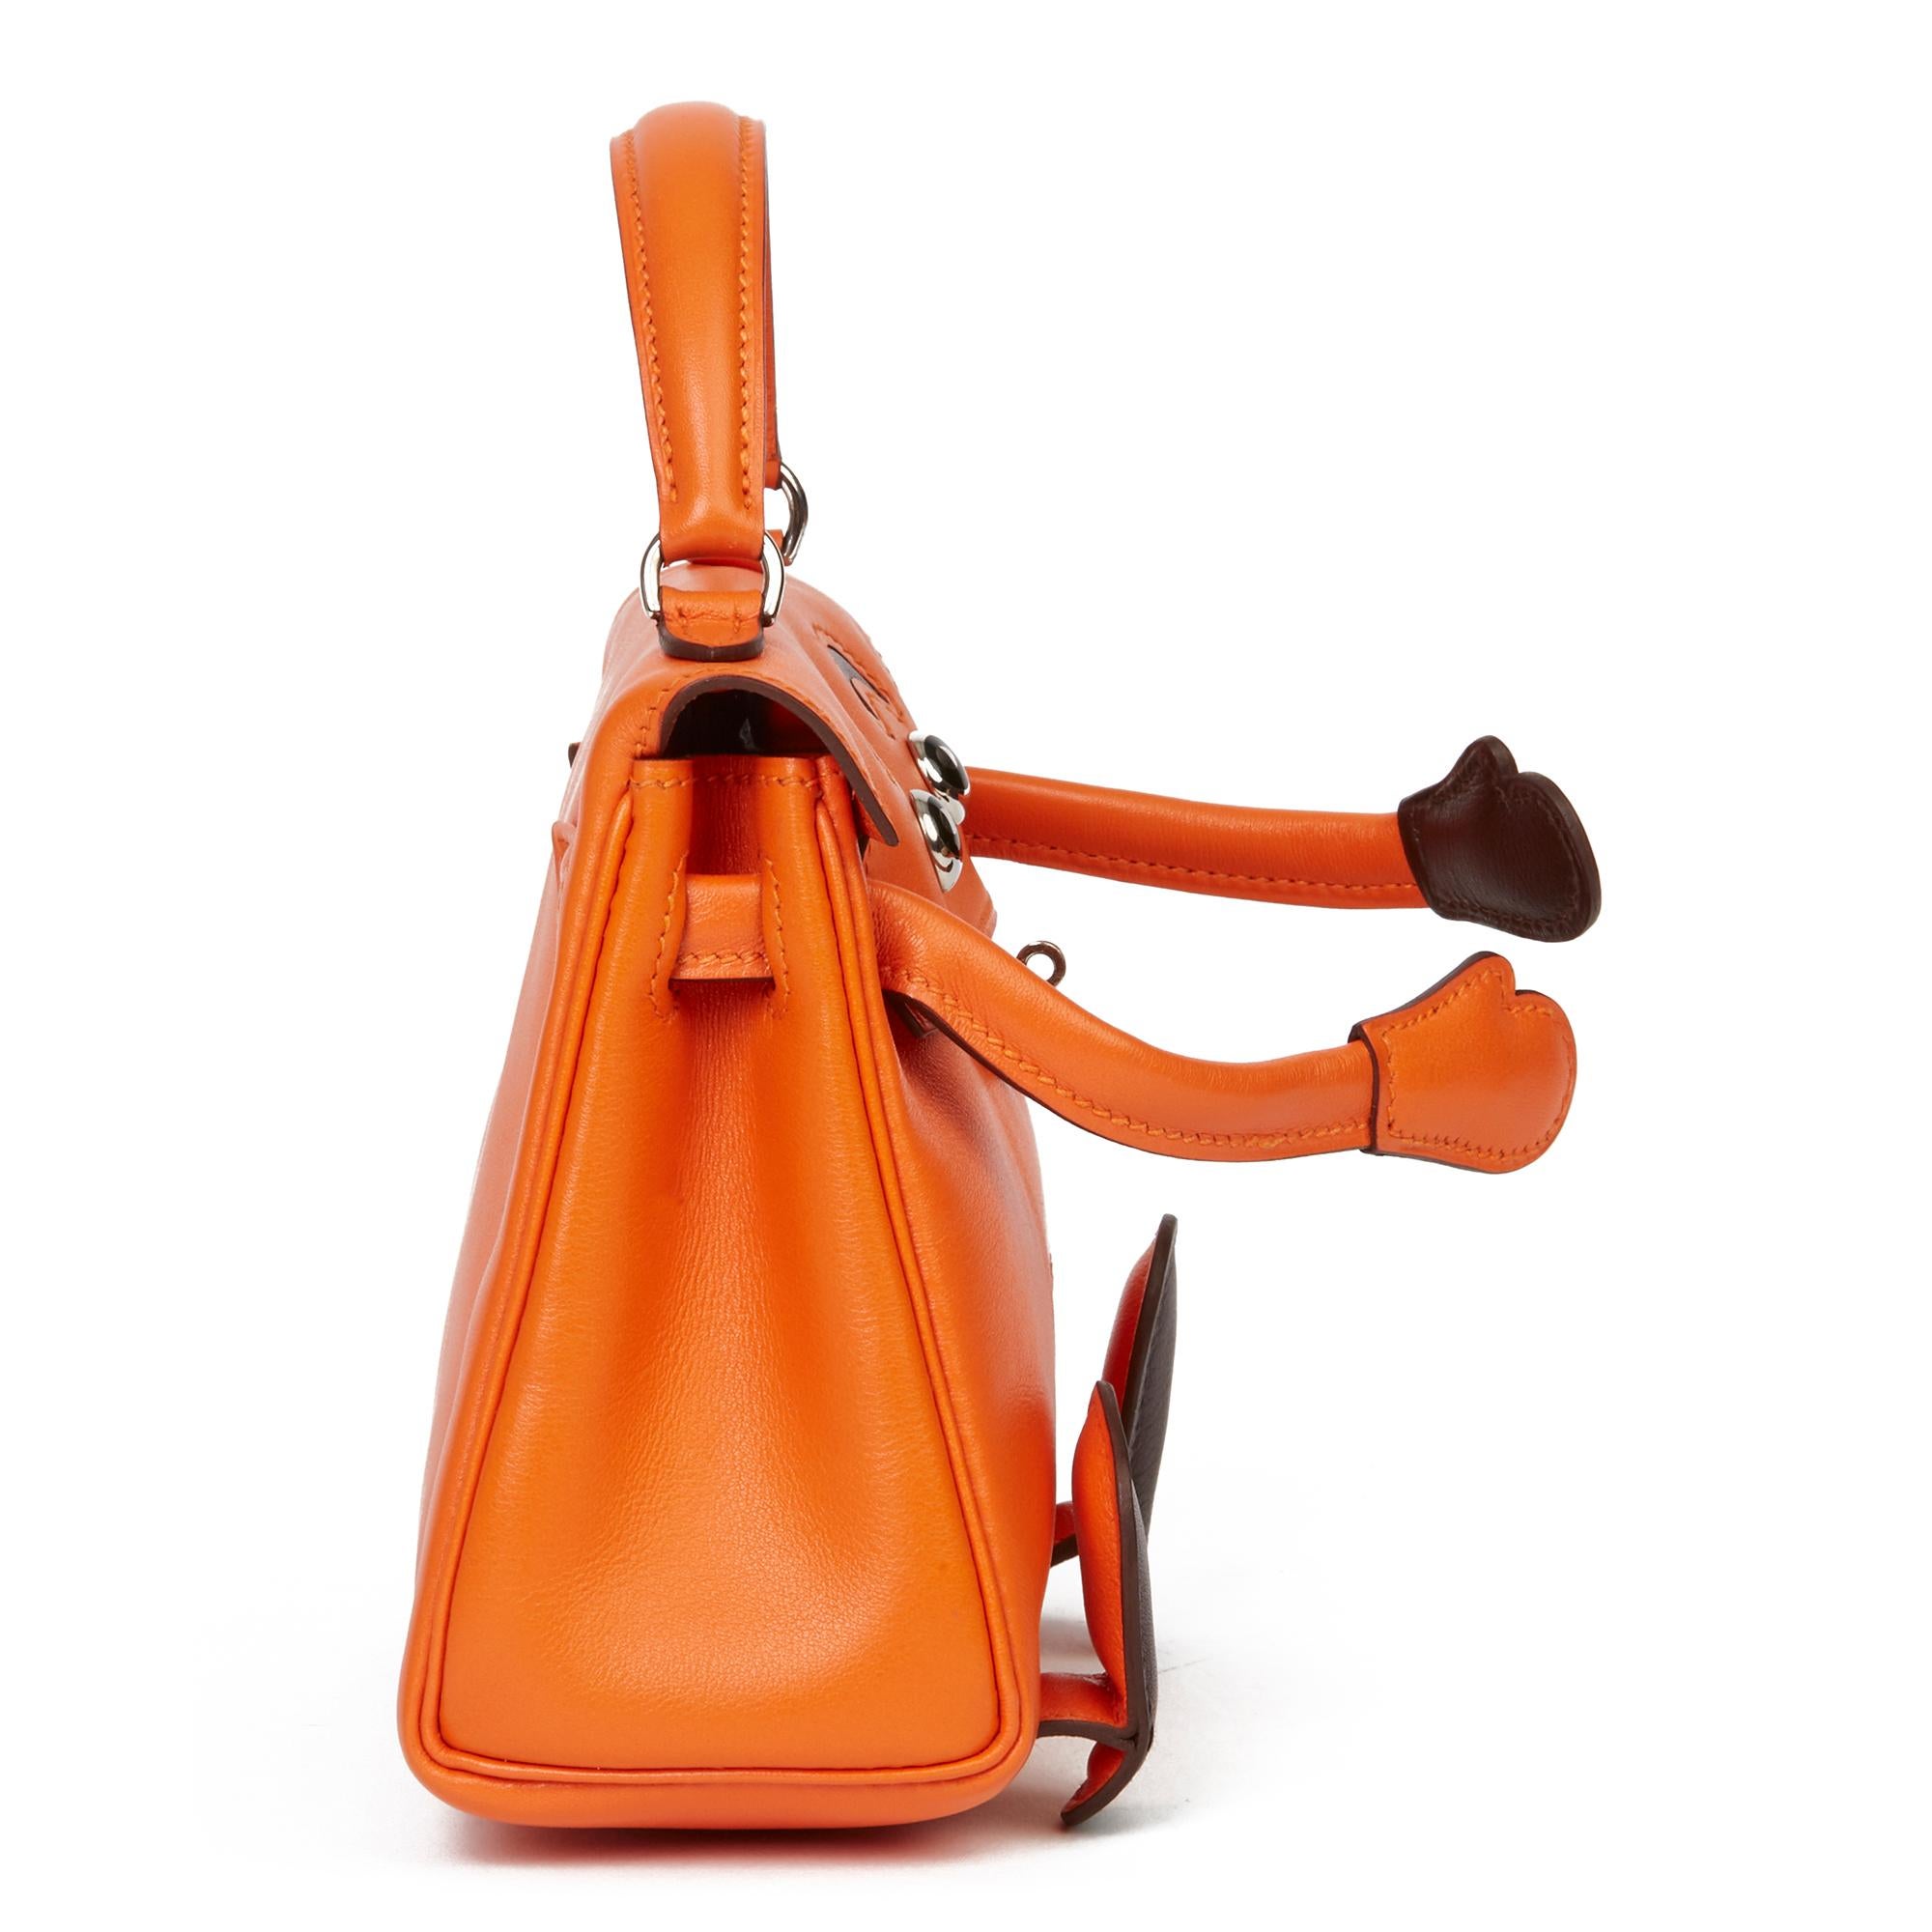 HERMÈS
Orange H Gulliver Leather Vintage Kelly Quelle Idole Doll

Xupes Reference: JJLG003
Serial Number: Unreadable
Age (Circa): 2000
Accompanied By: Hermès Dust Bag, Box
Authenticity Details: Date Stamp (Made in France)
Gender: Ladies
Type: Top